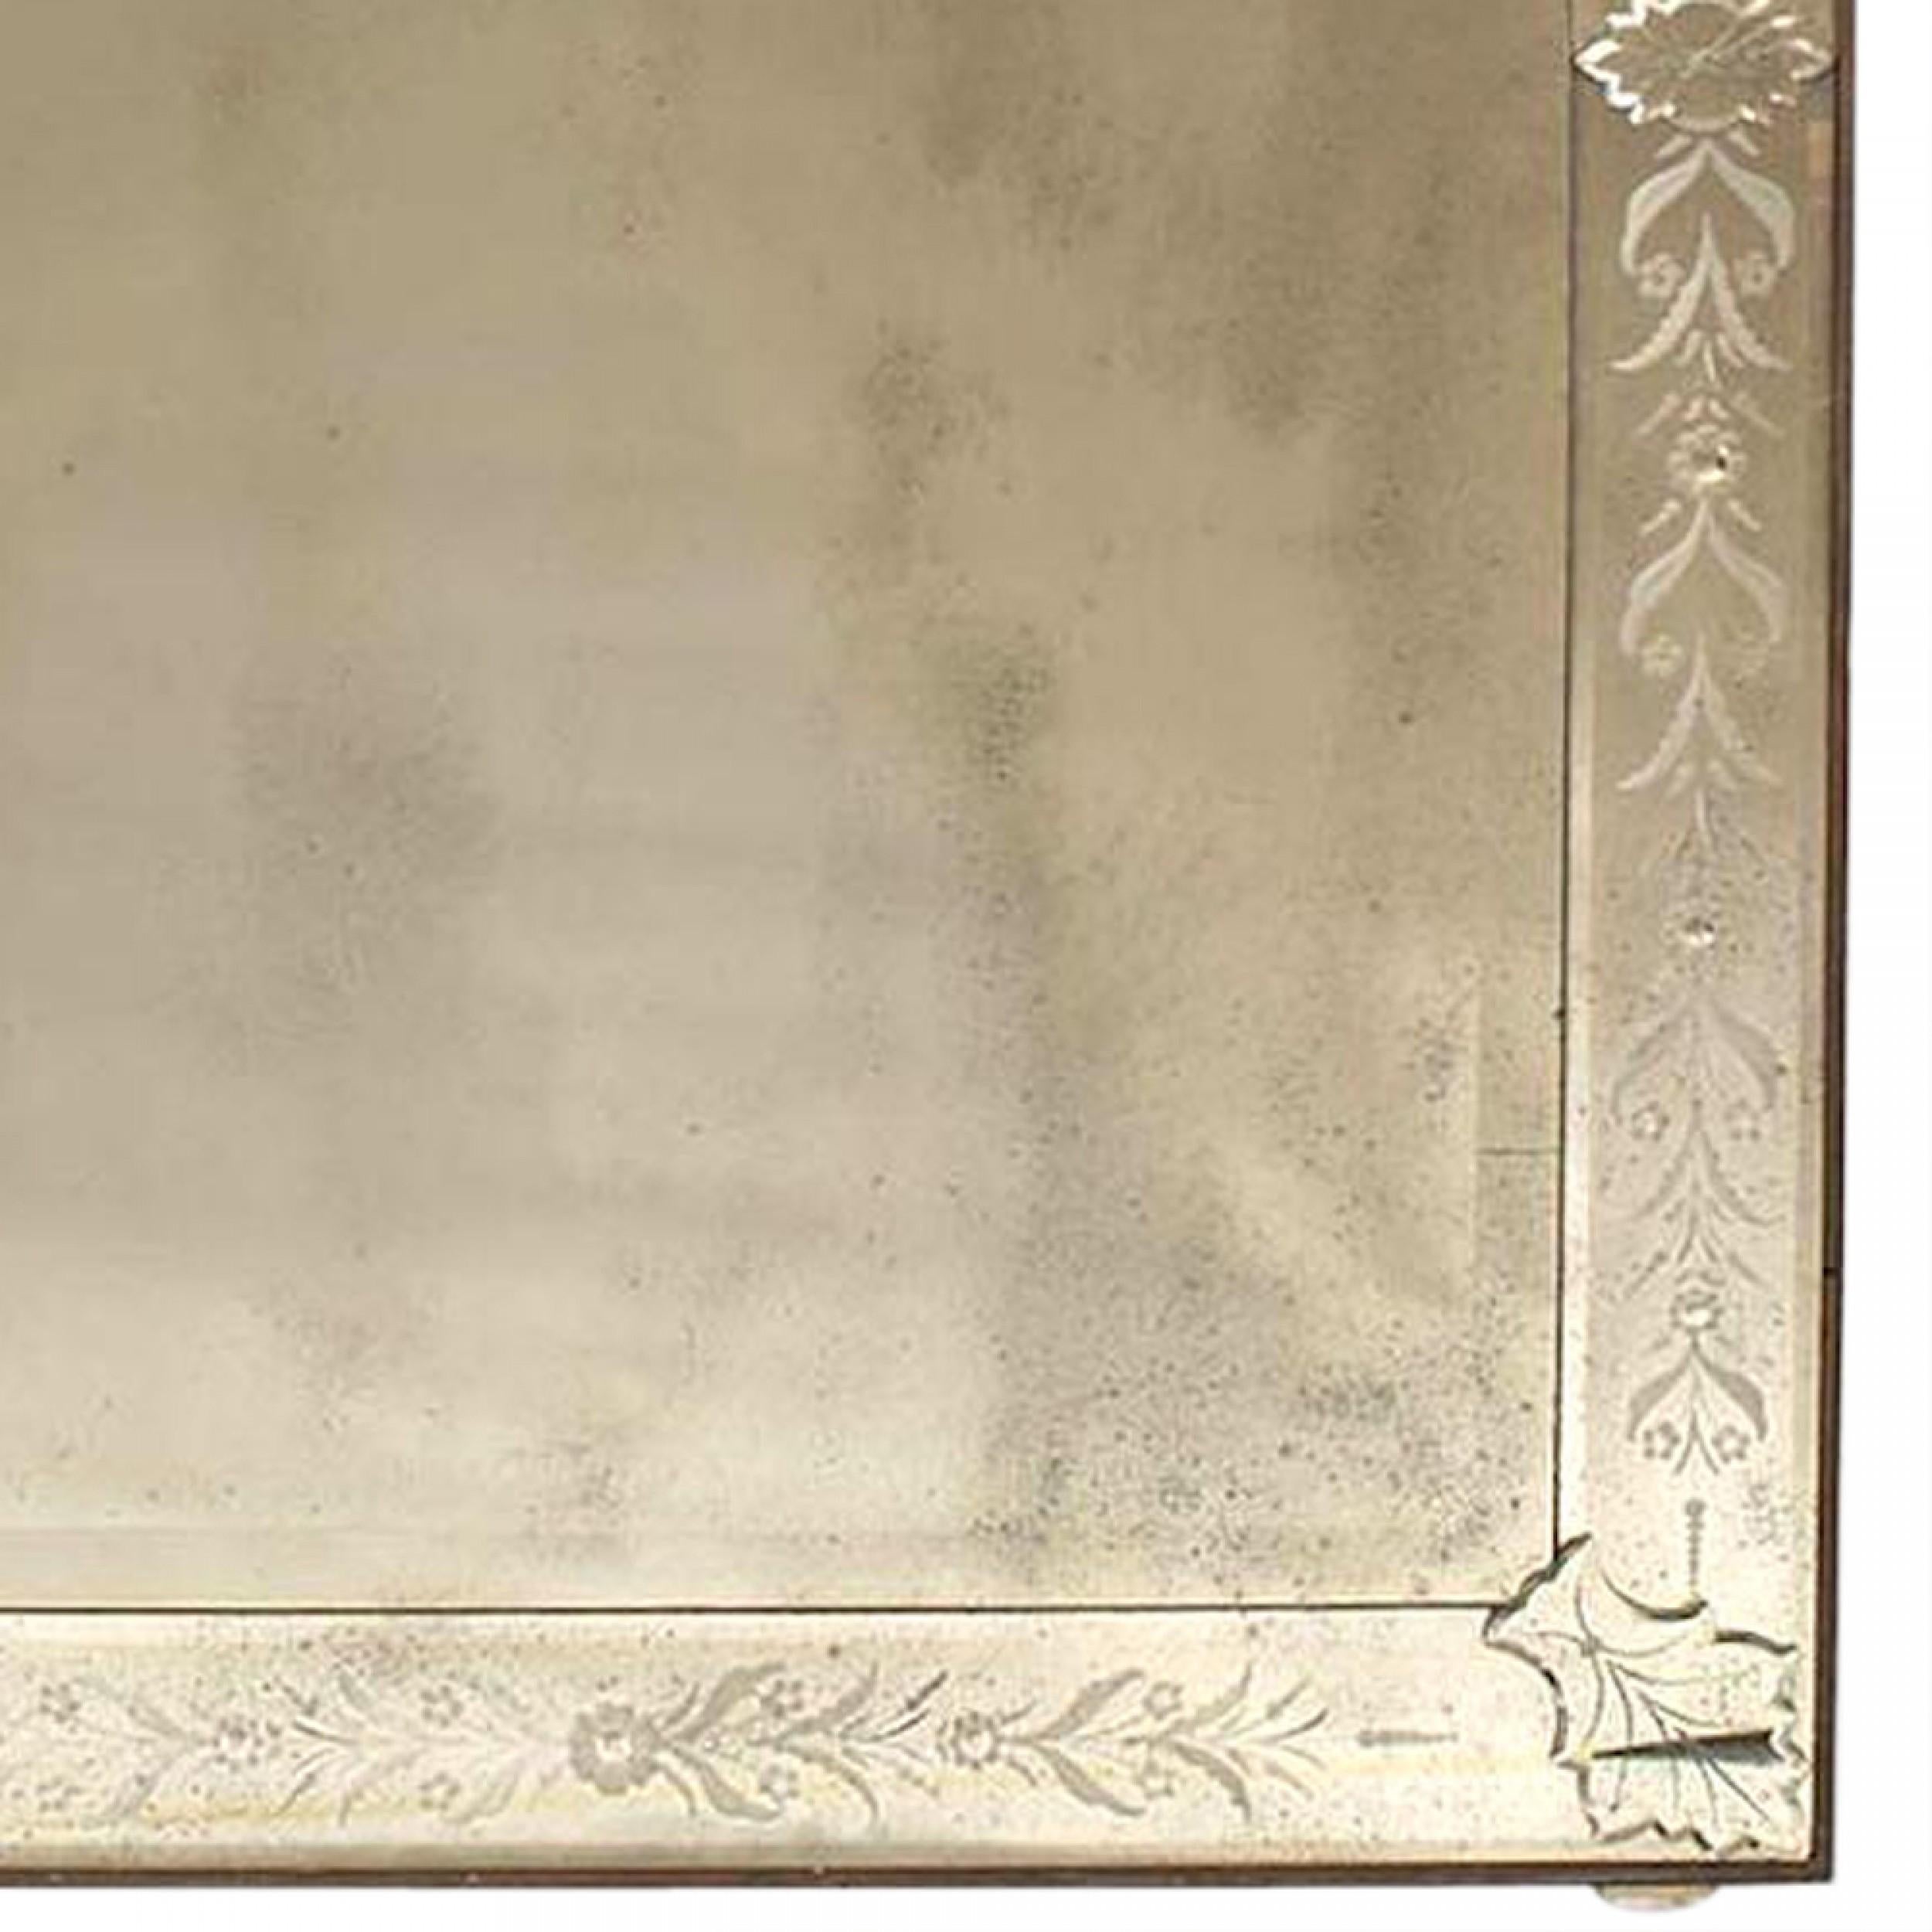 2 Italian Venetian Murano (20th Century) rectangular wall mirrors with beveled and etched floral and scroll design border and beveled central mirror. (ONGARO E FUGA) (PRICED EACH)
